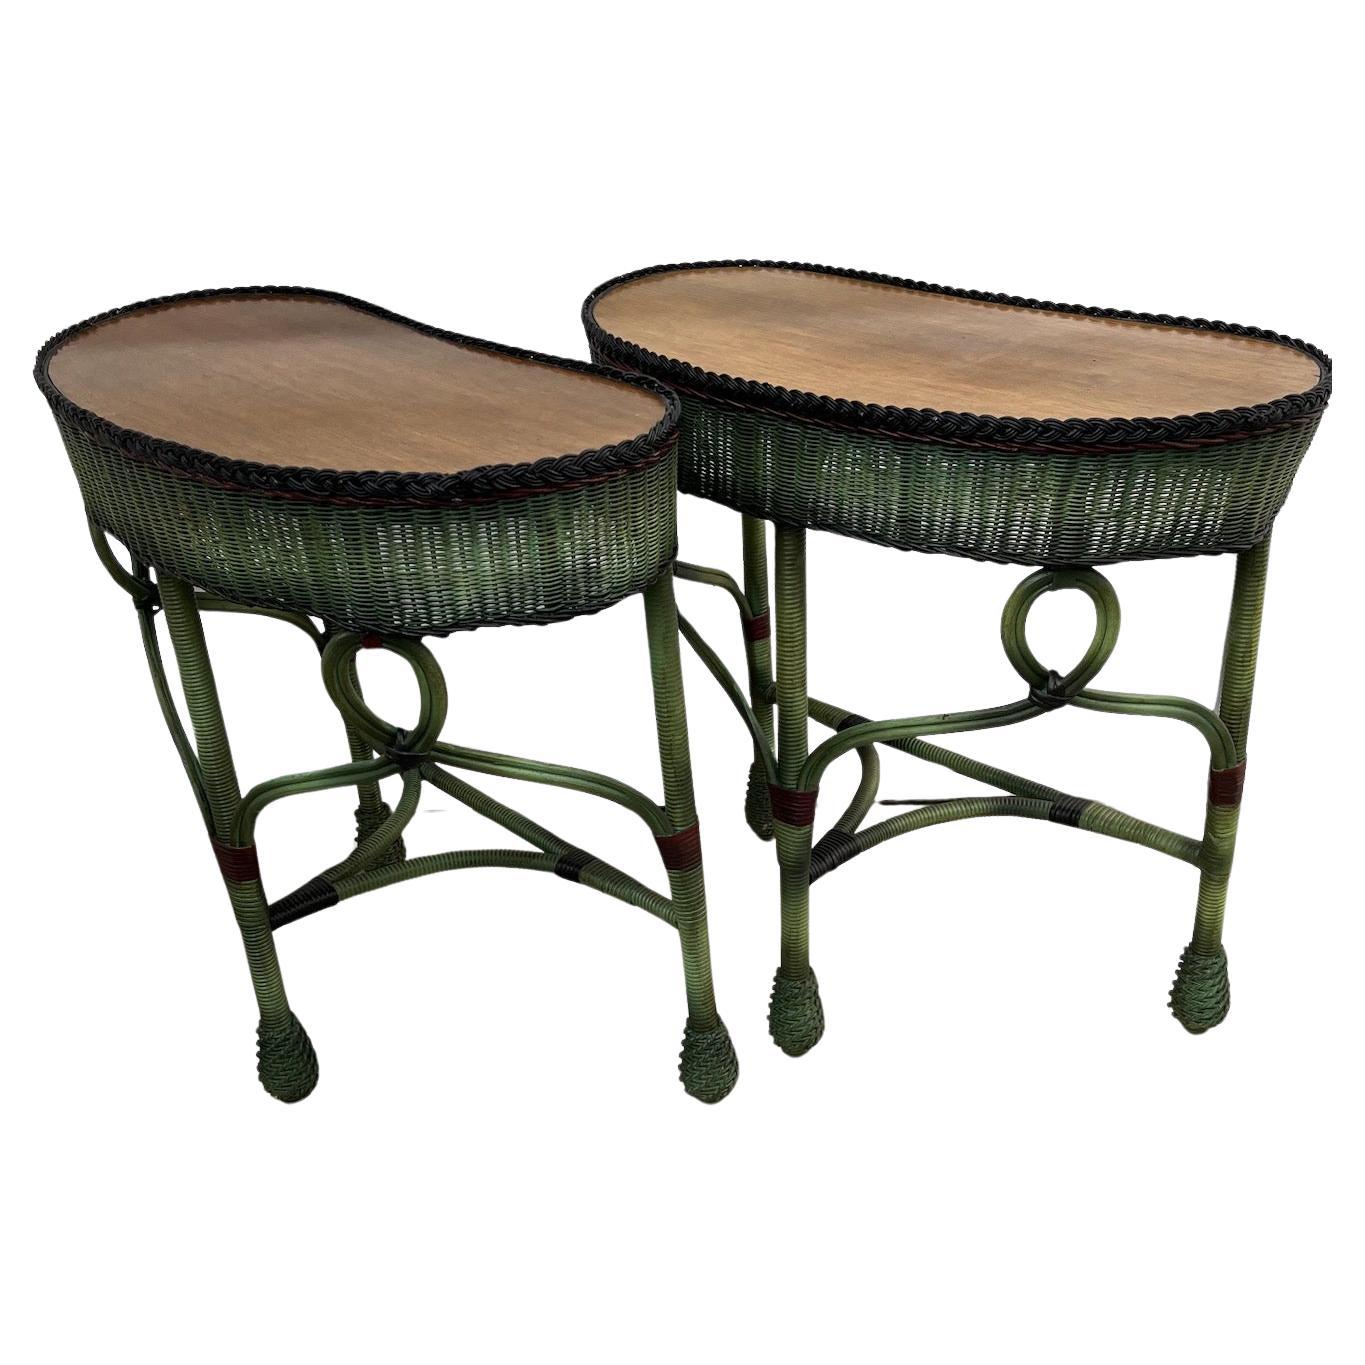 Other A pair of Kidney Shaped Side Tables in French Green with Quarter Sawn Oak Tops For Sale